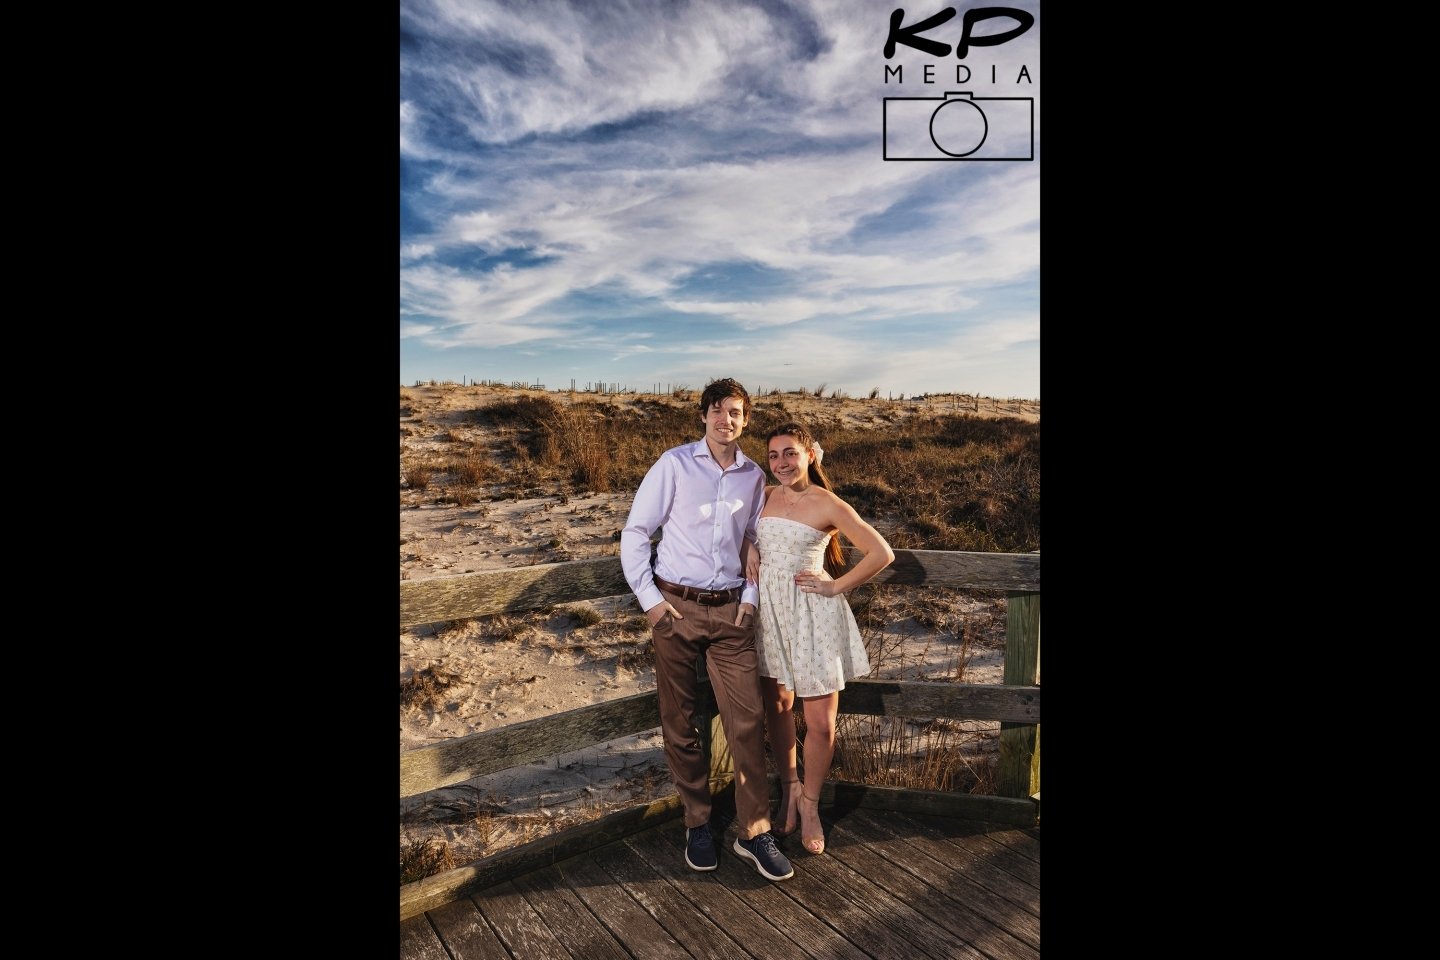 Thank you to Stacey and Nick for bringing us to the top of the lighthouse!

#weddings #brideandgroom #engagementshoot #weddingphotography #weddinginspiration #weddingphotoinspiration #weddingphotographer #weddingplanner #photography #weddingparty #bo